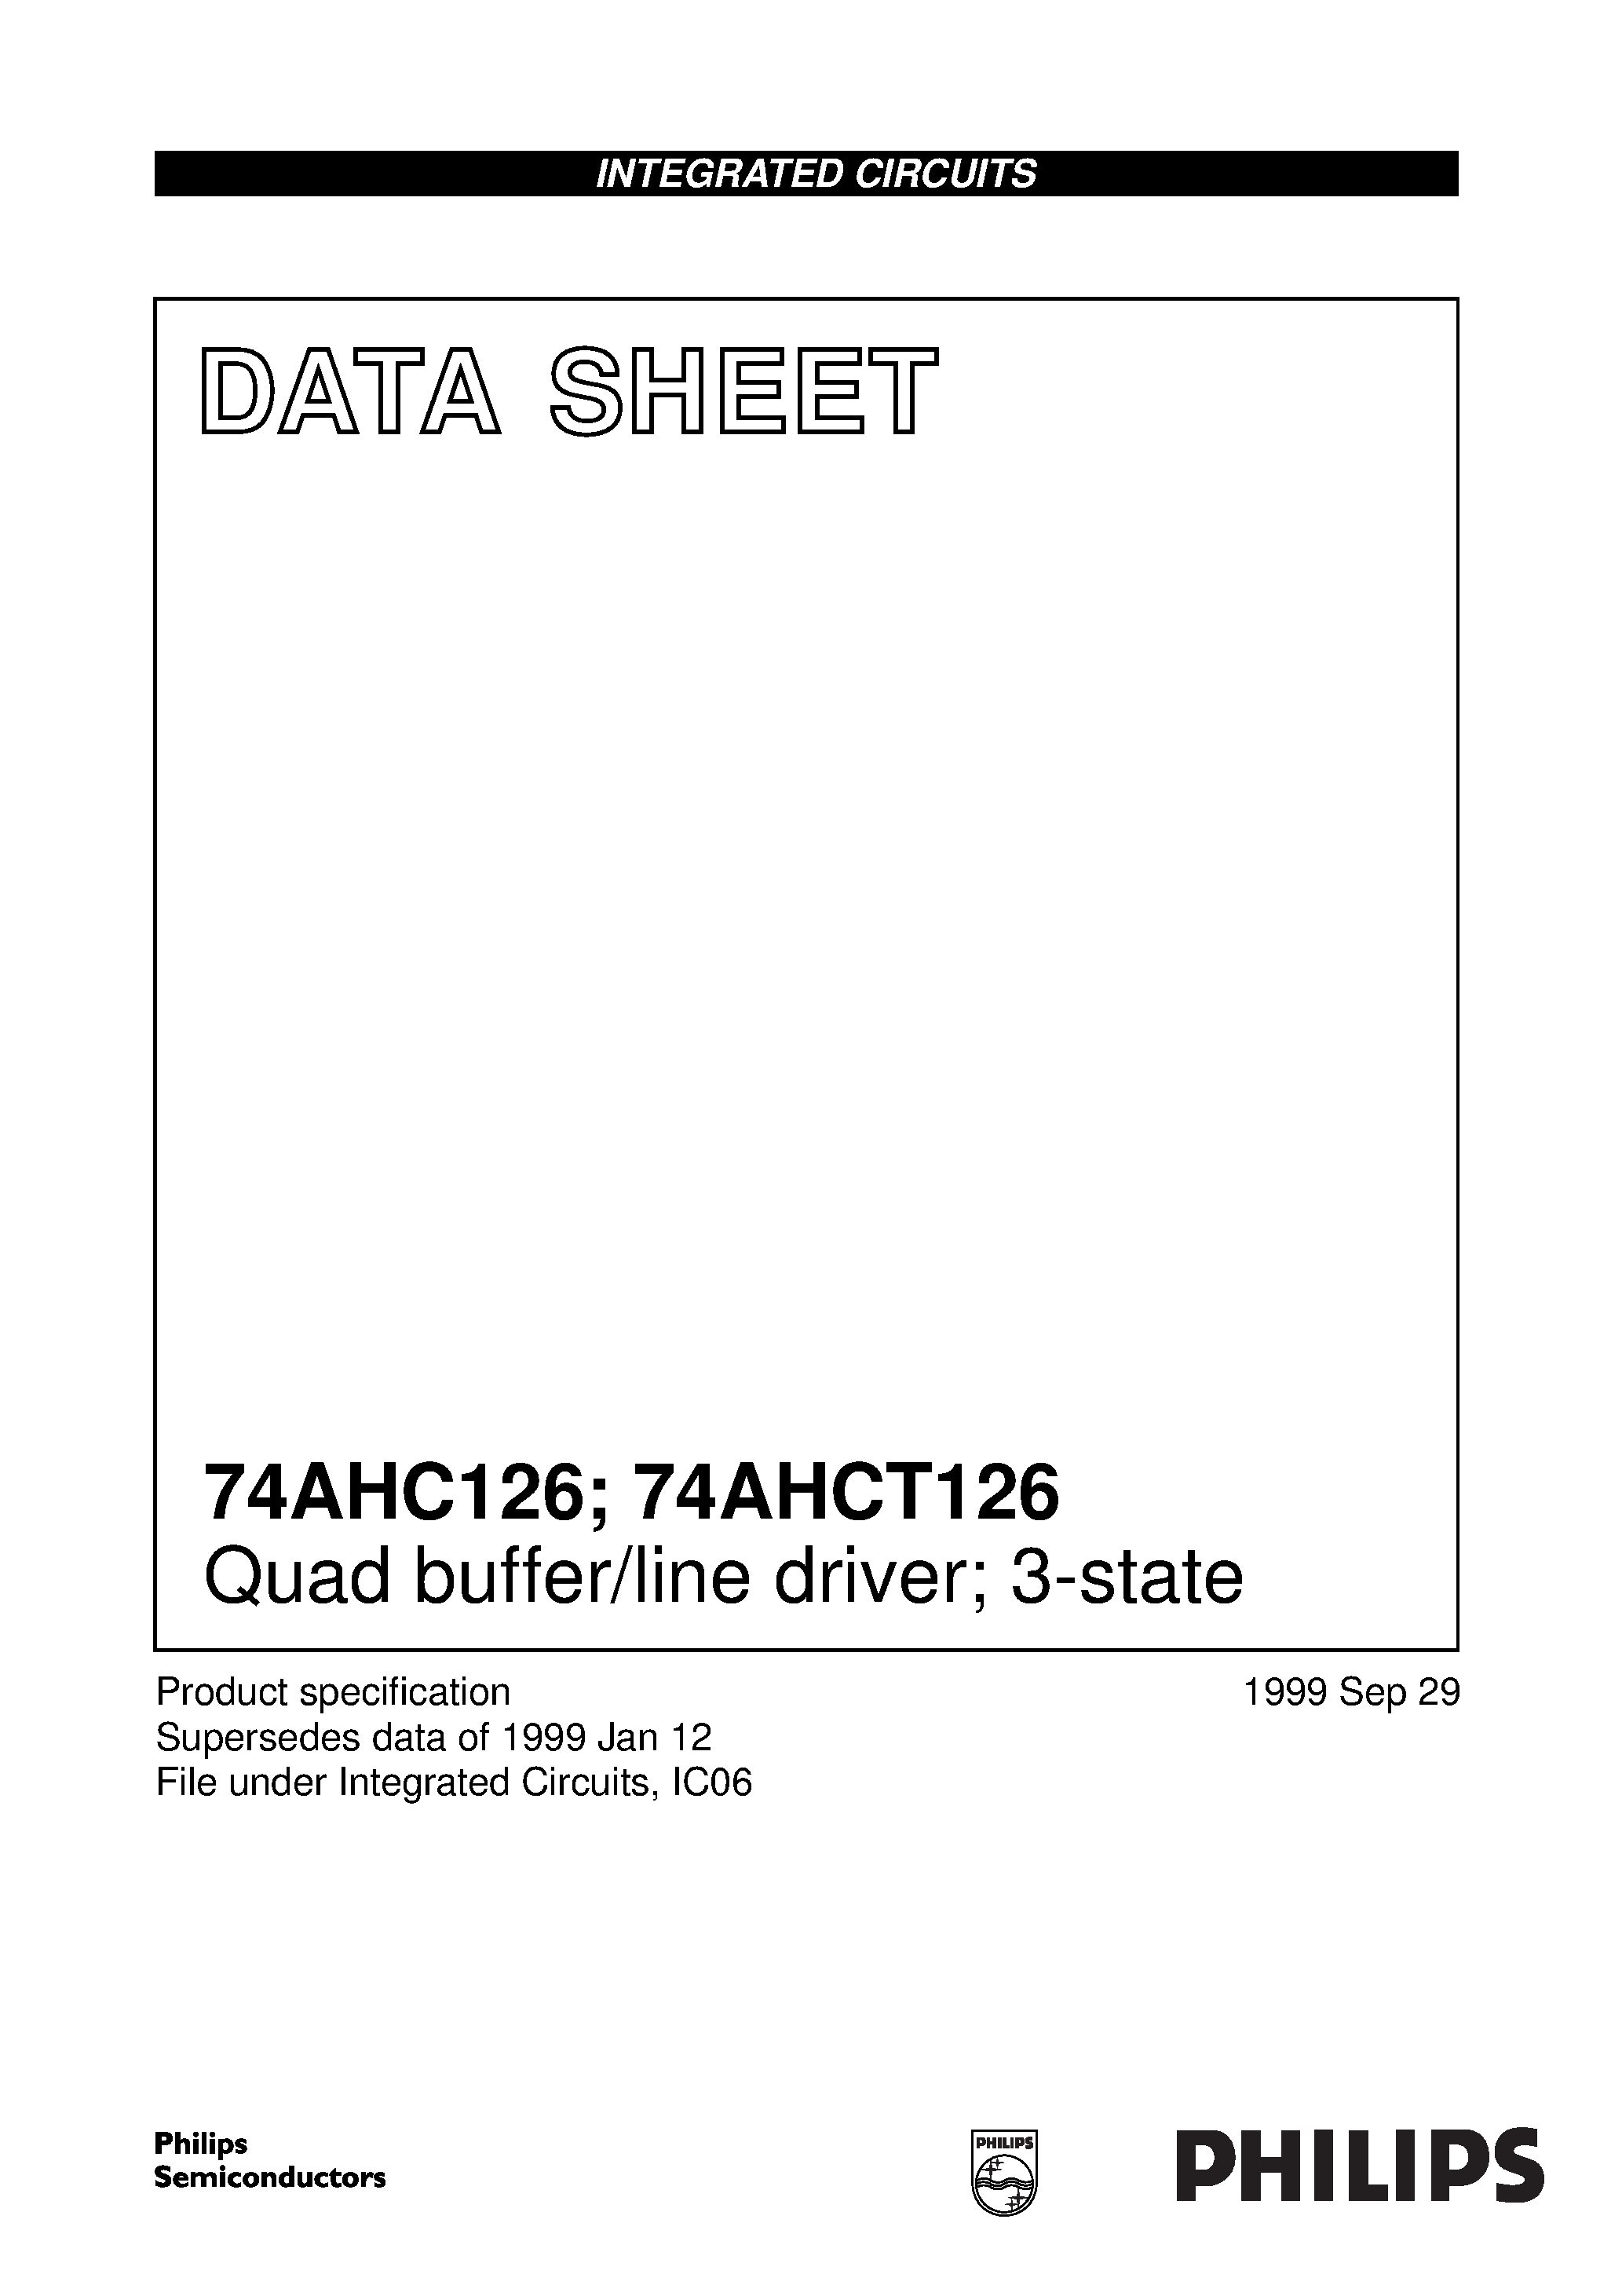 Datasheet 74AHC126PWDH - Quad buffer/line driver; 3-state page 1